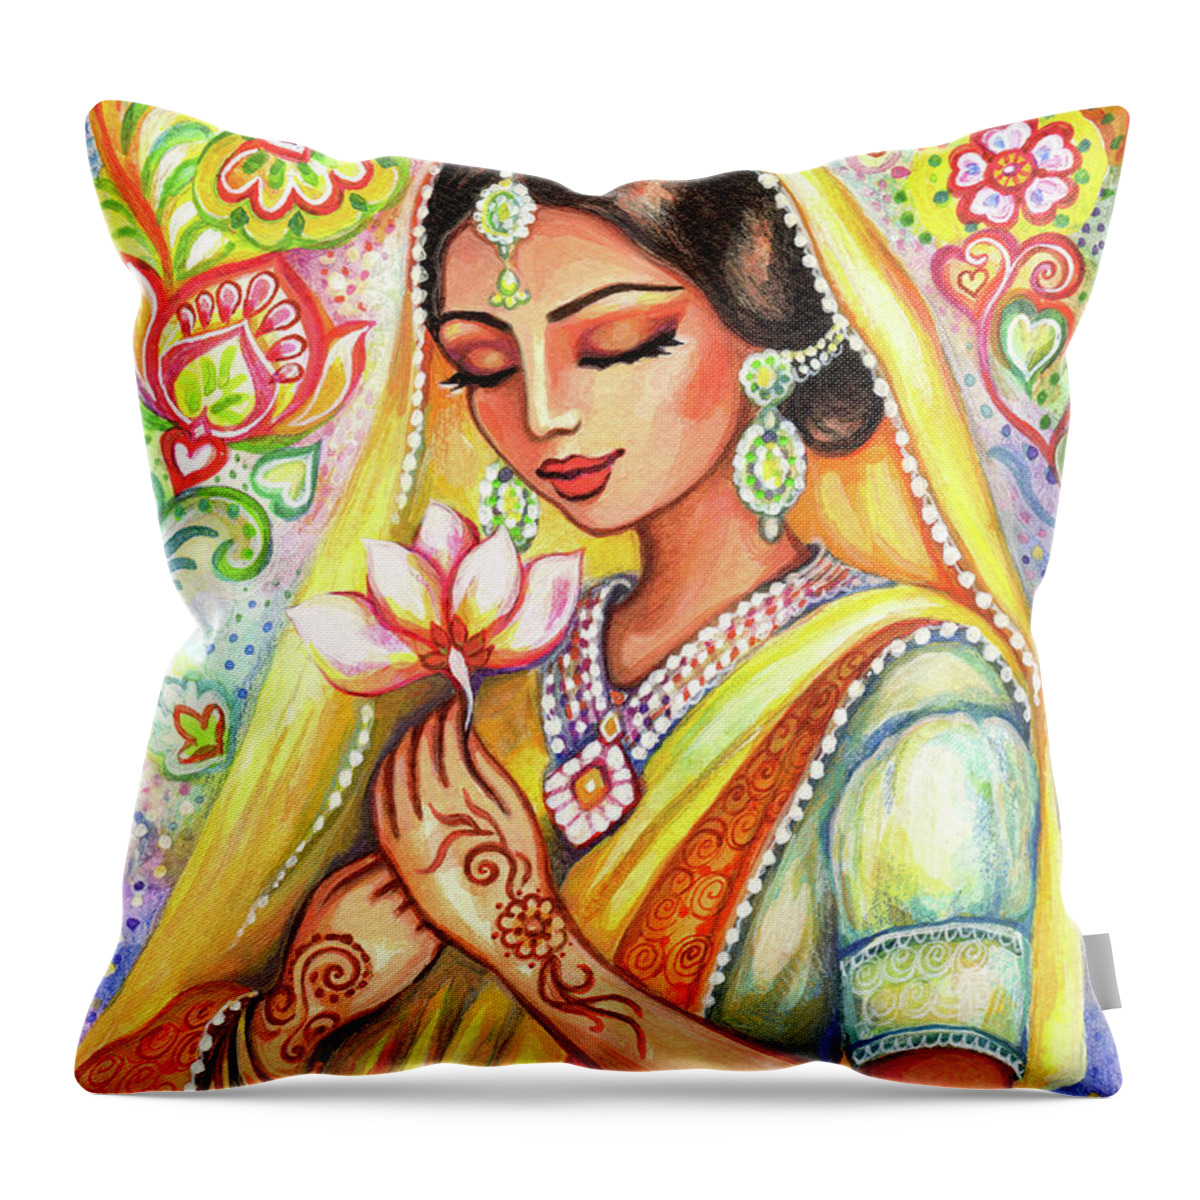 Praying Woman Throw Pillow featuring the painting Sacred Wish by Eva Campbell